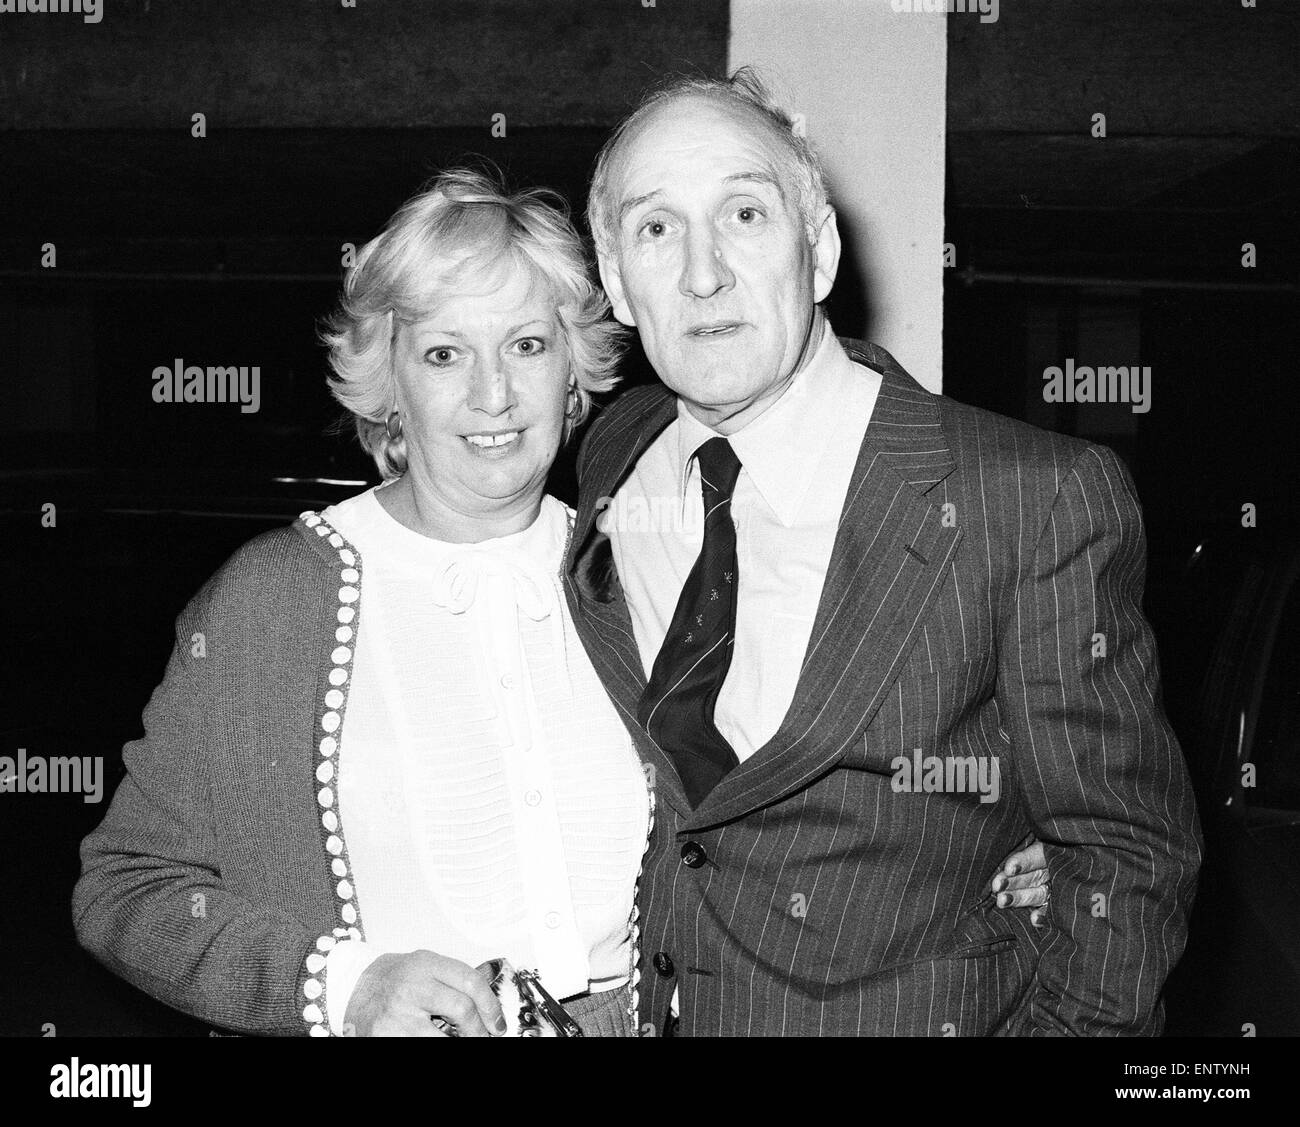 Thomas Wisbey and wife Rennee, pictured leaving the Old Bailey in London, March 1982. The Great Train Robber walked to freedom after being fined £500 for his part in another train crime. In 1965 he was jailed for 30 years for his part in the great £2,750,000 raid. But the Old Bailey judge told Wisbey, who was paroled in 1976, that his latest offence, handling travelers cheques stolen from mail trains by a gang, was 'not of the gravest'. Stock Photo